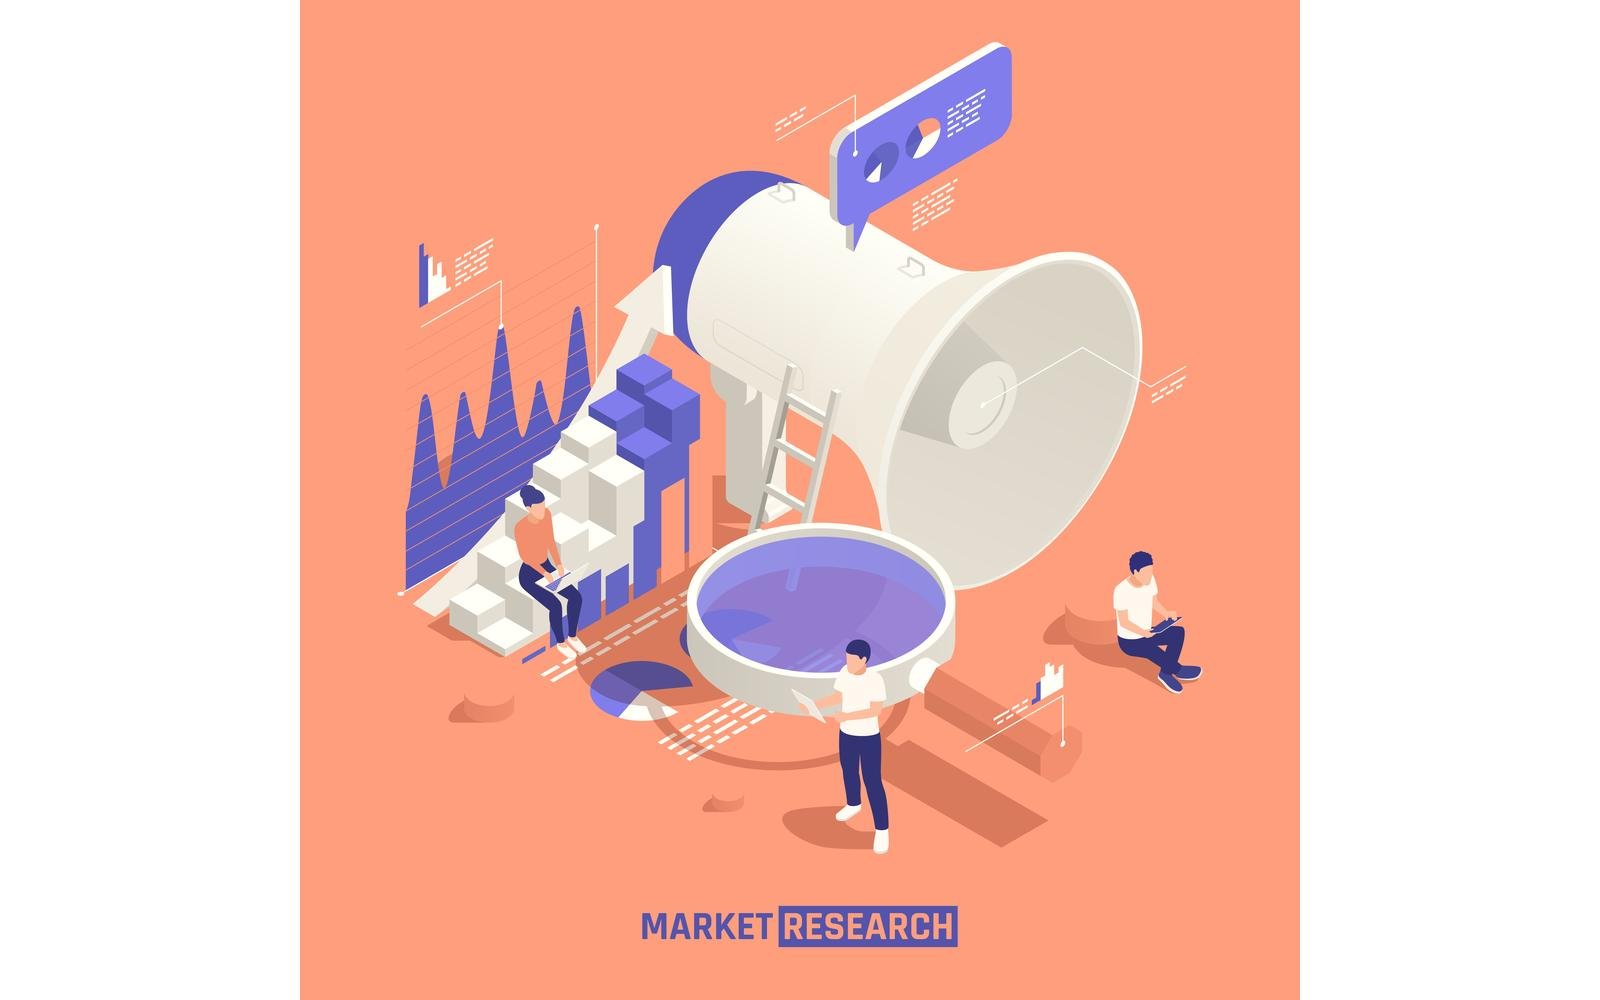 Market Research Isometric 201210103 Vector Illustration Concept